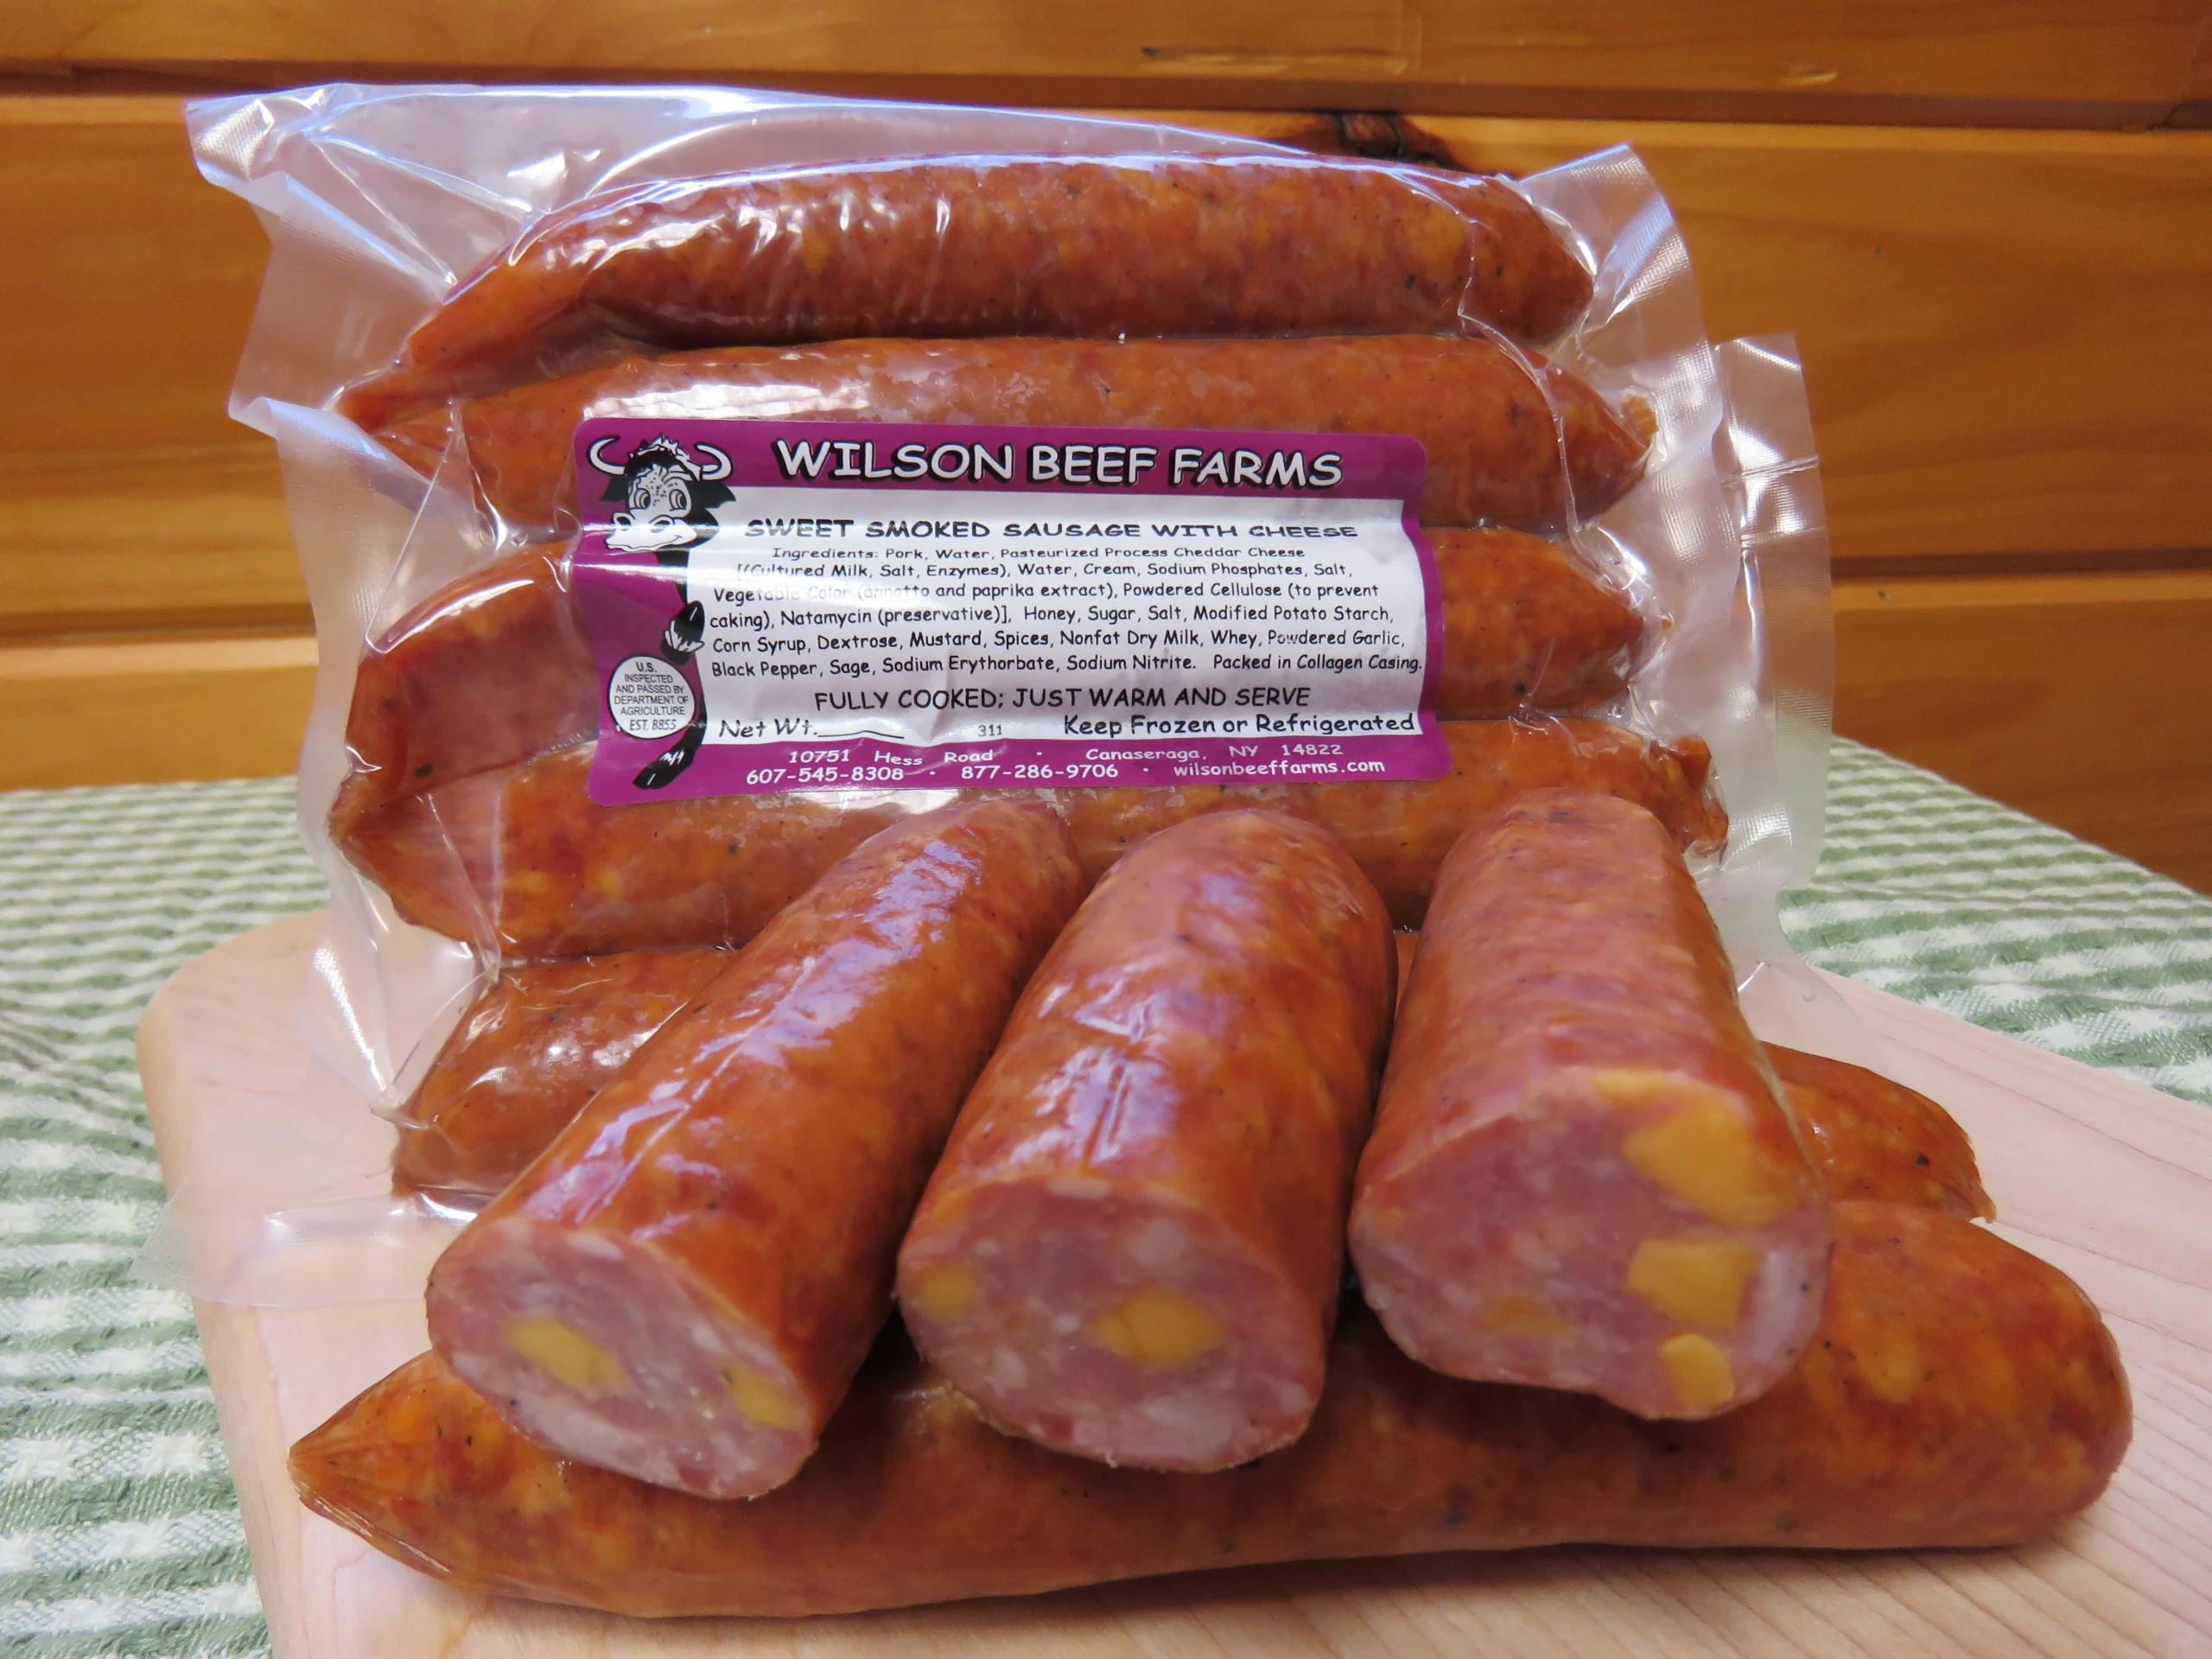 smoked sausage with cheese - What cheese is good with sausage